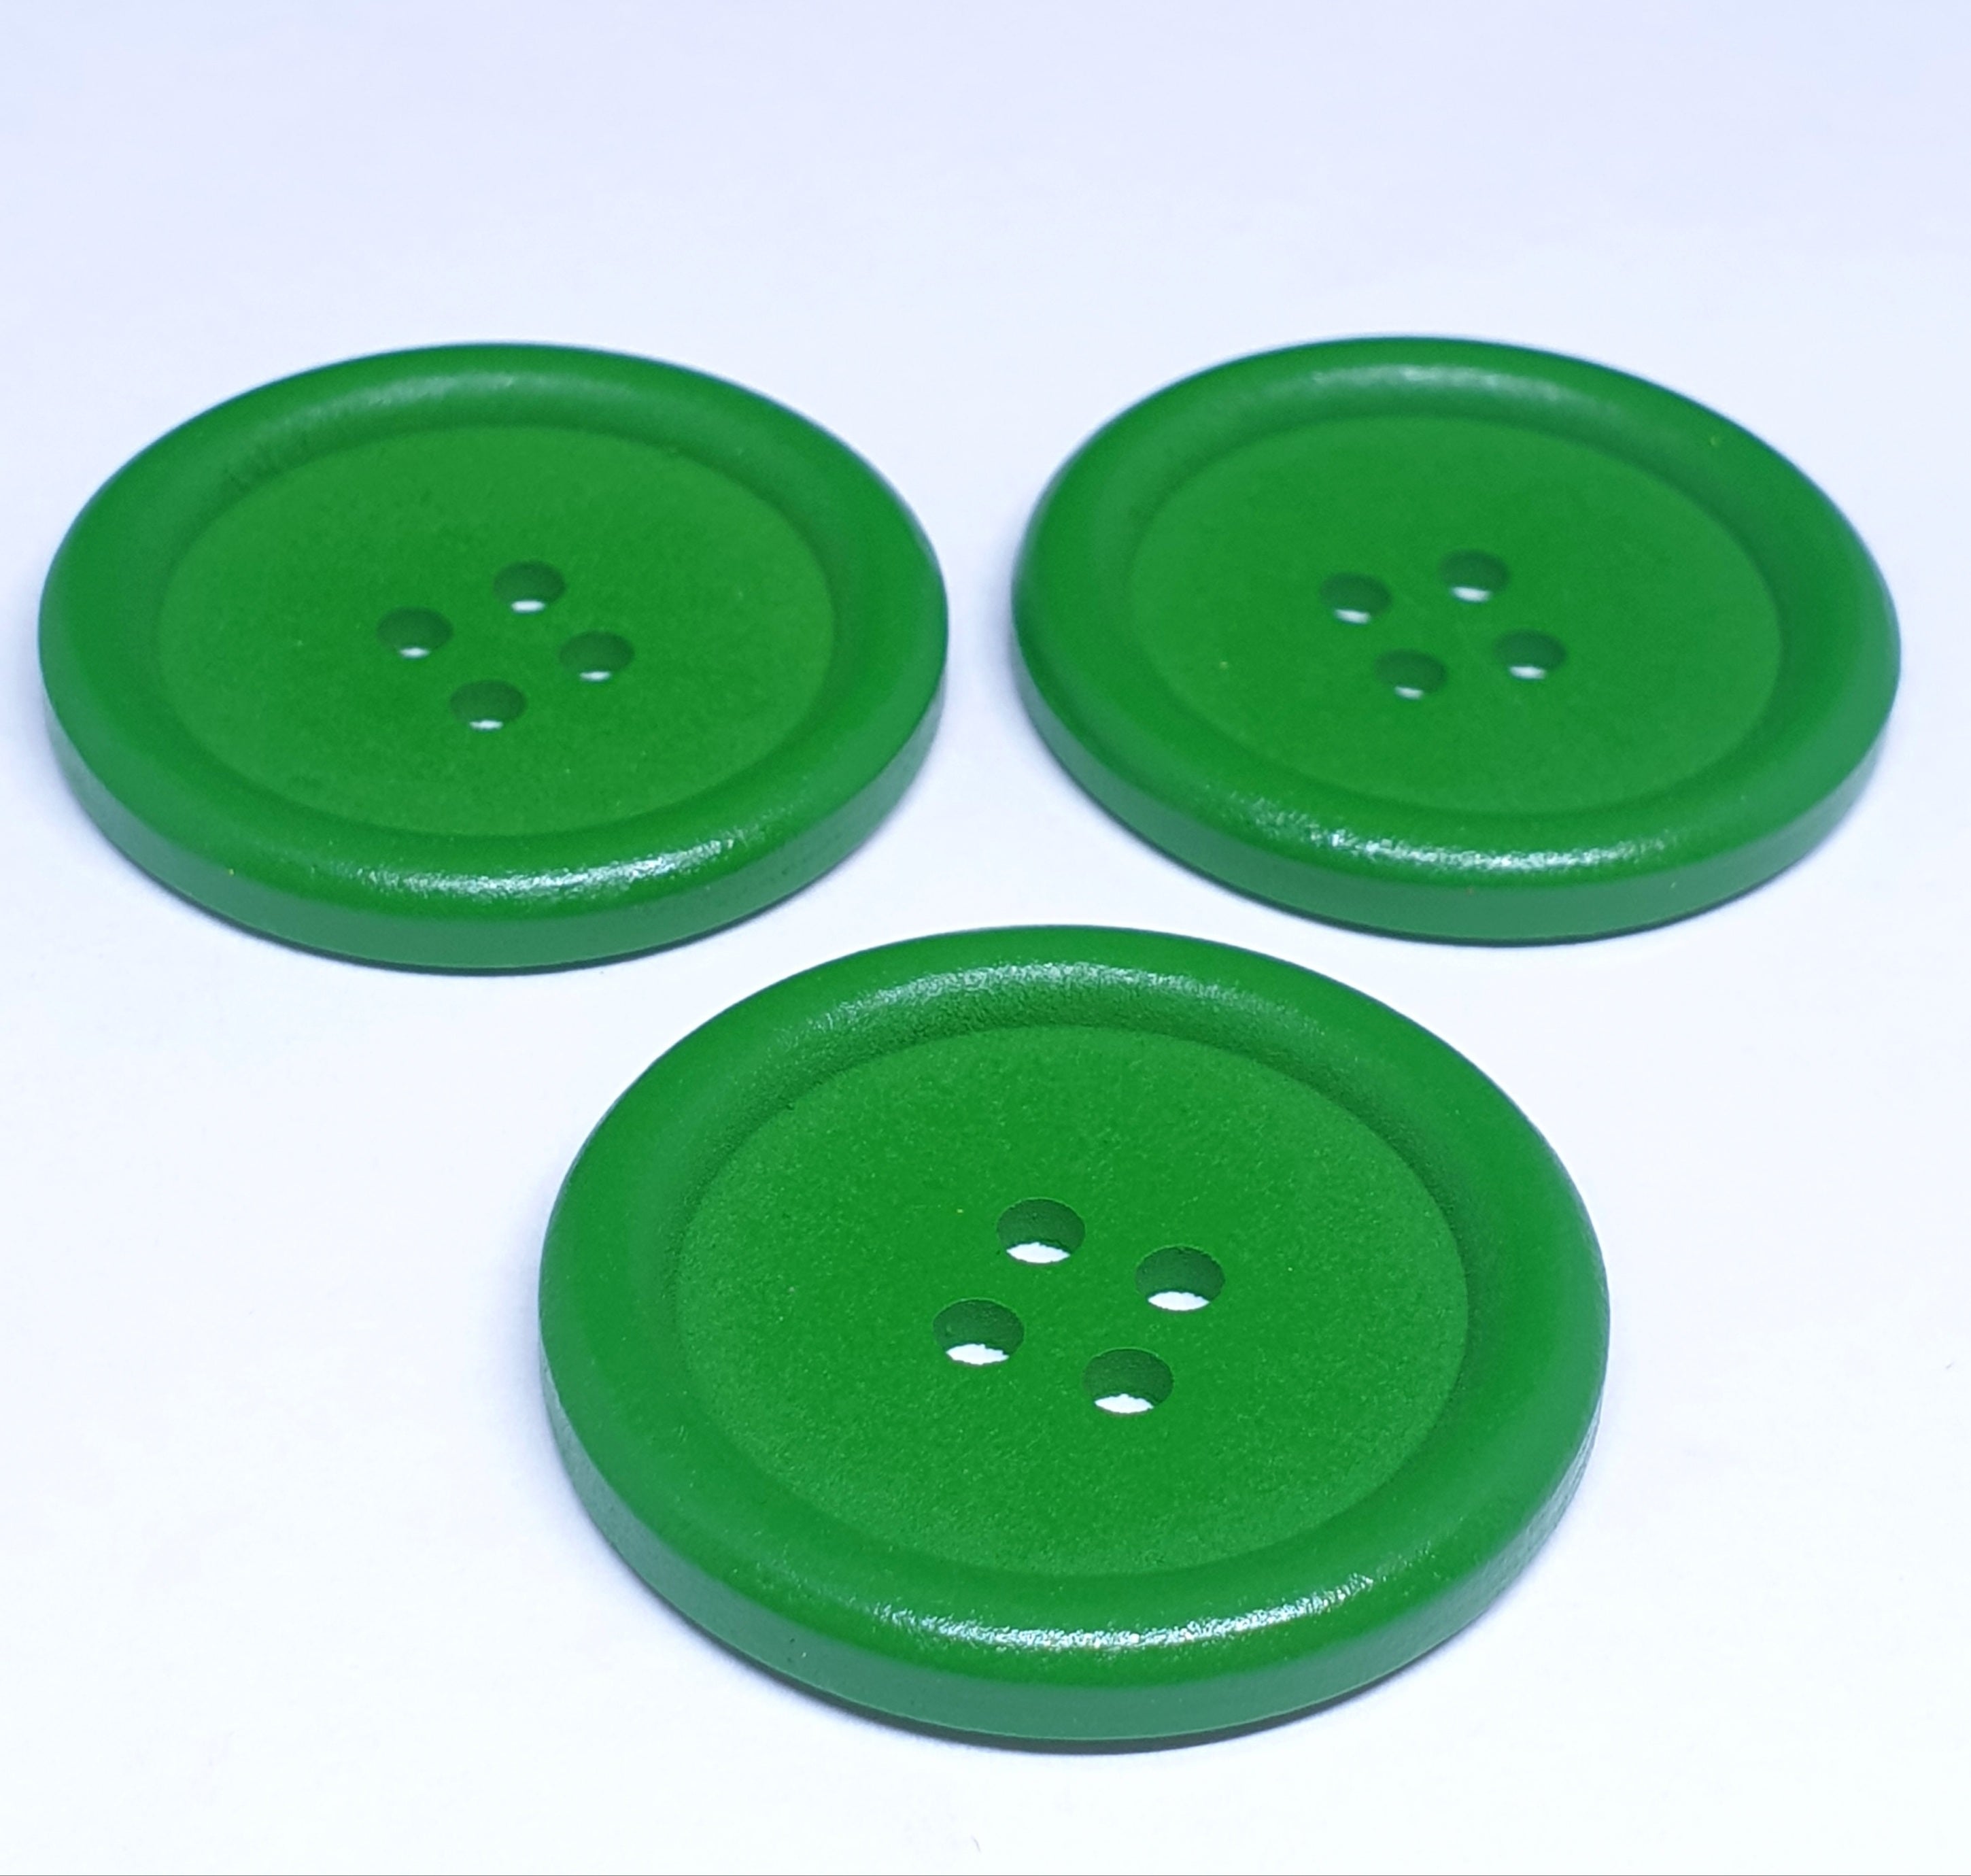 MajorCrafts 12pcs 30mm Green Round 4 Holes Large Wooden Sewing Buttons